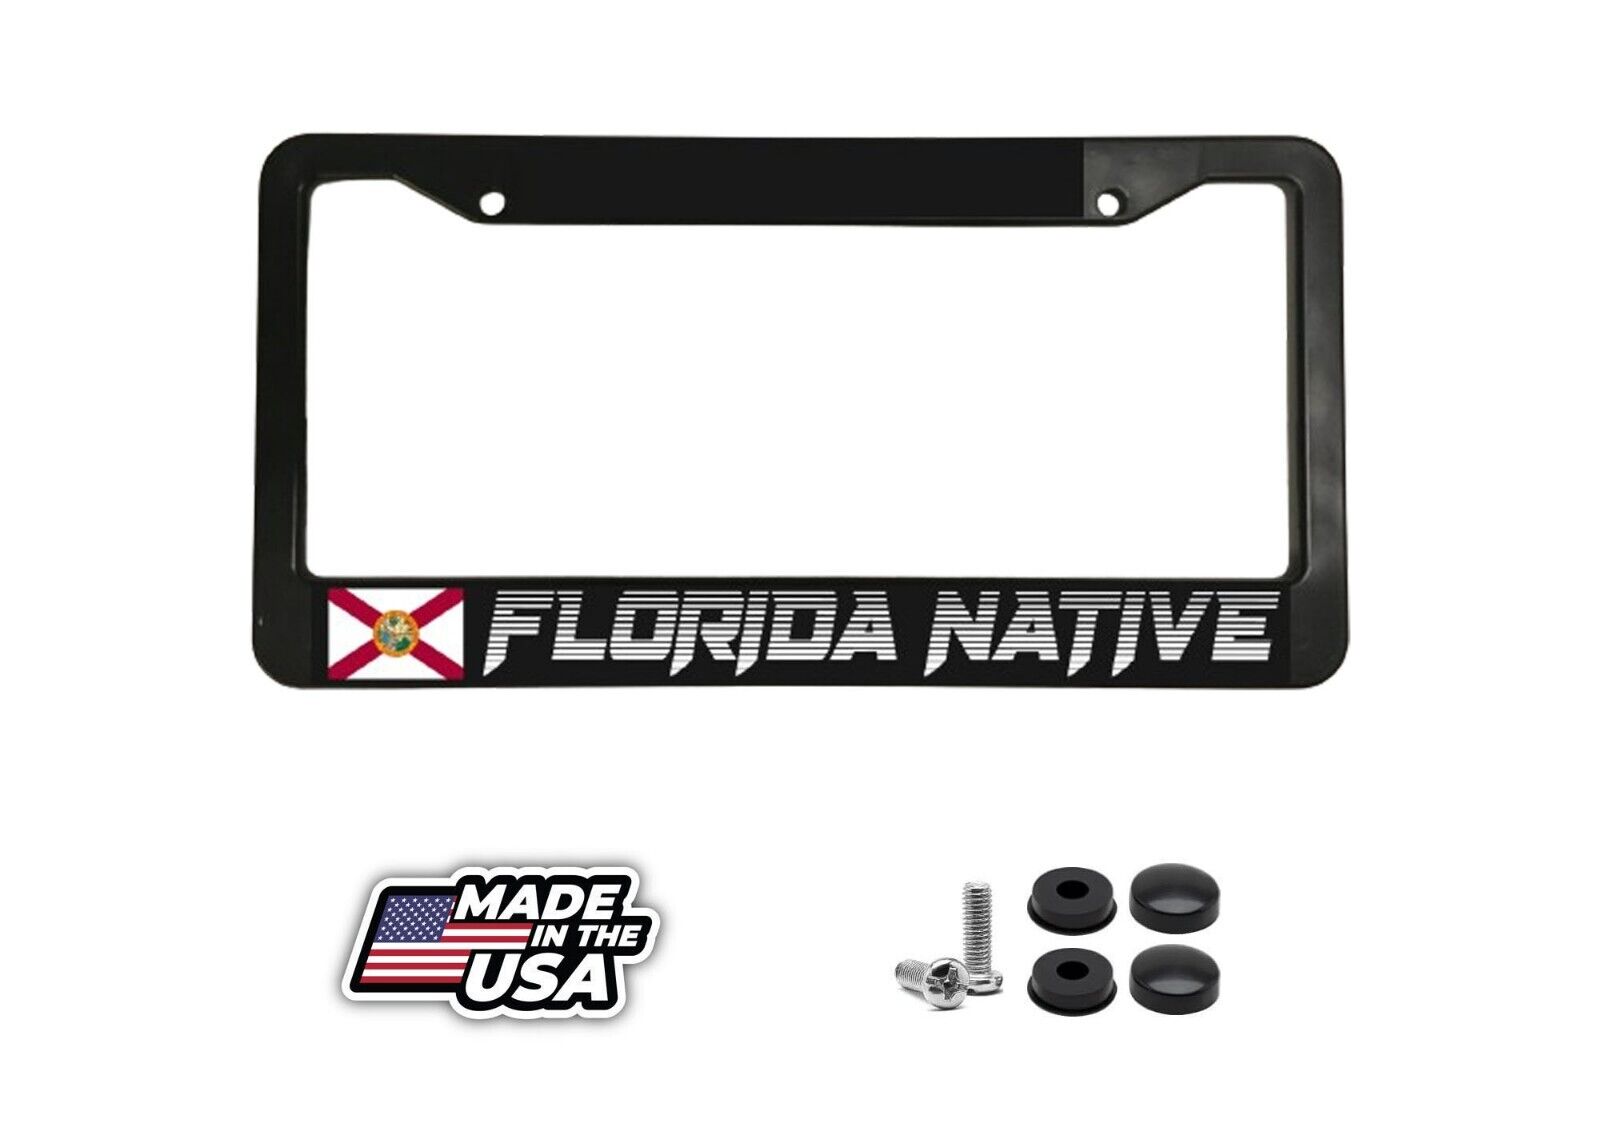 Florida Native State Orlando Tampa Miami Country Floridian License Plate Frame